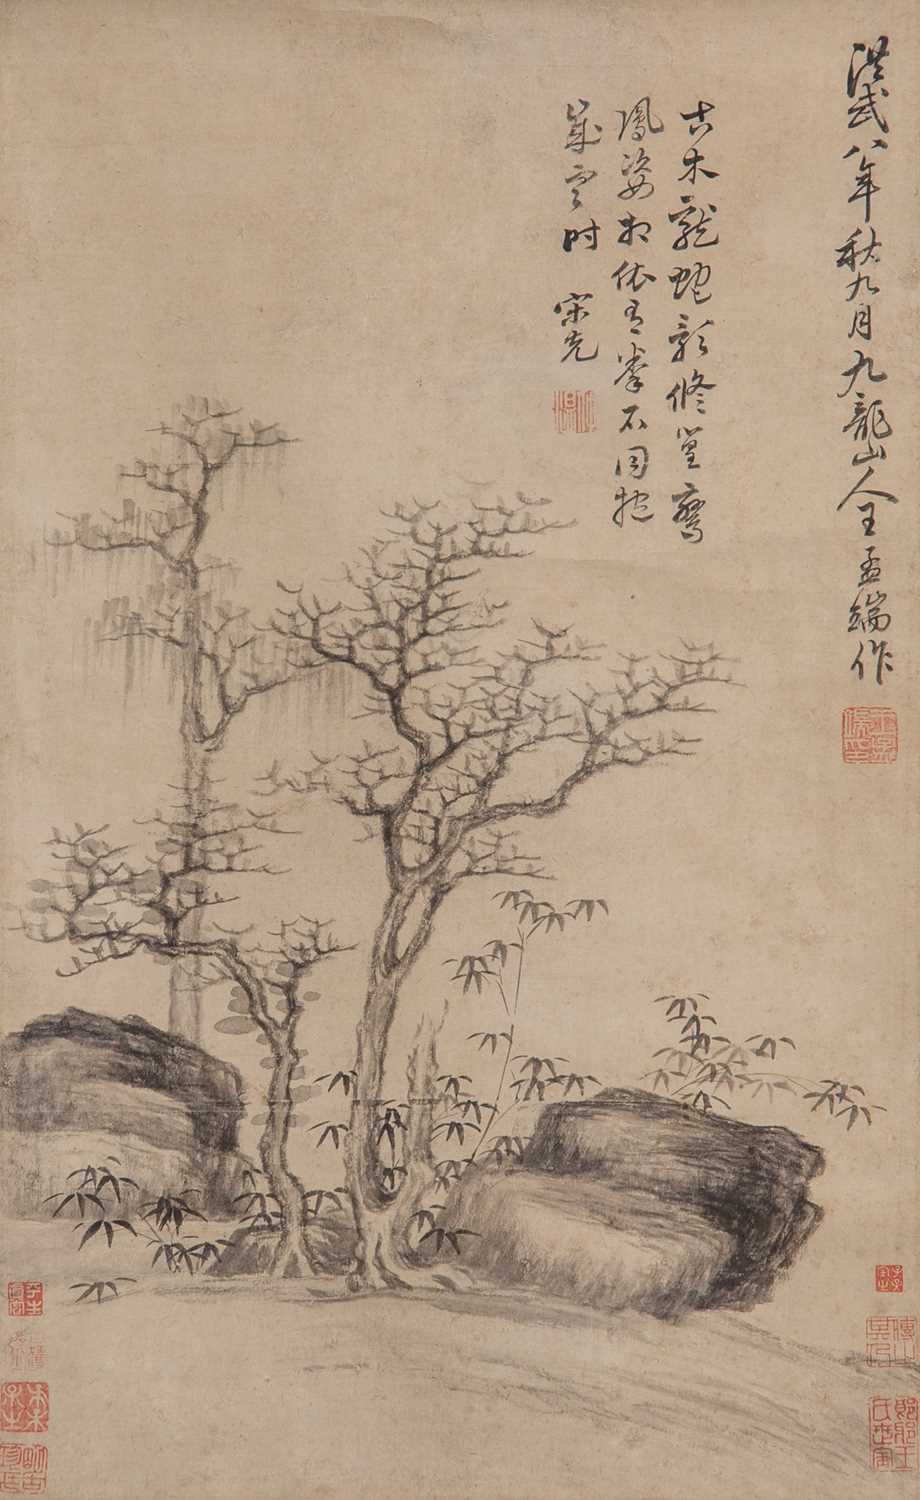 AFTER WANG FU (19TH CENTURY) PINE AND ROCK A Chinese scroll painting, ink on paper, with the